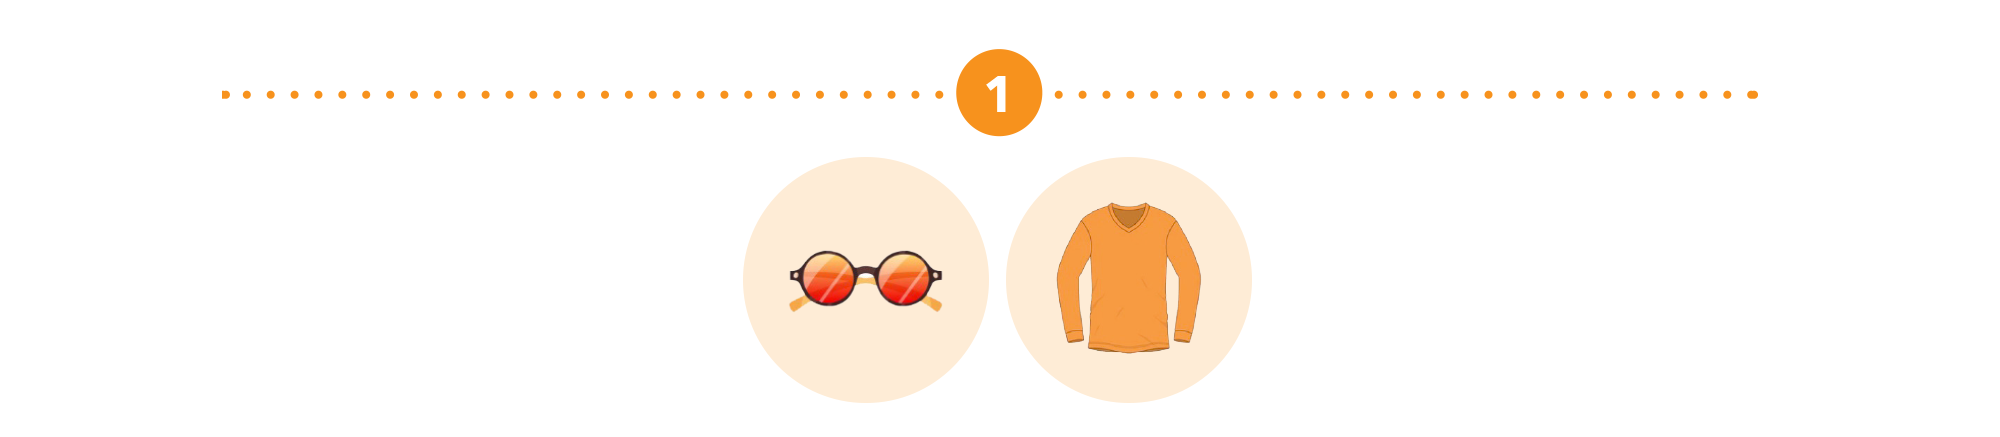 A rendering of sunglasses against an orange background. A rendering of an orange sweater against an orange background.